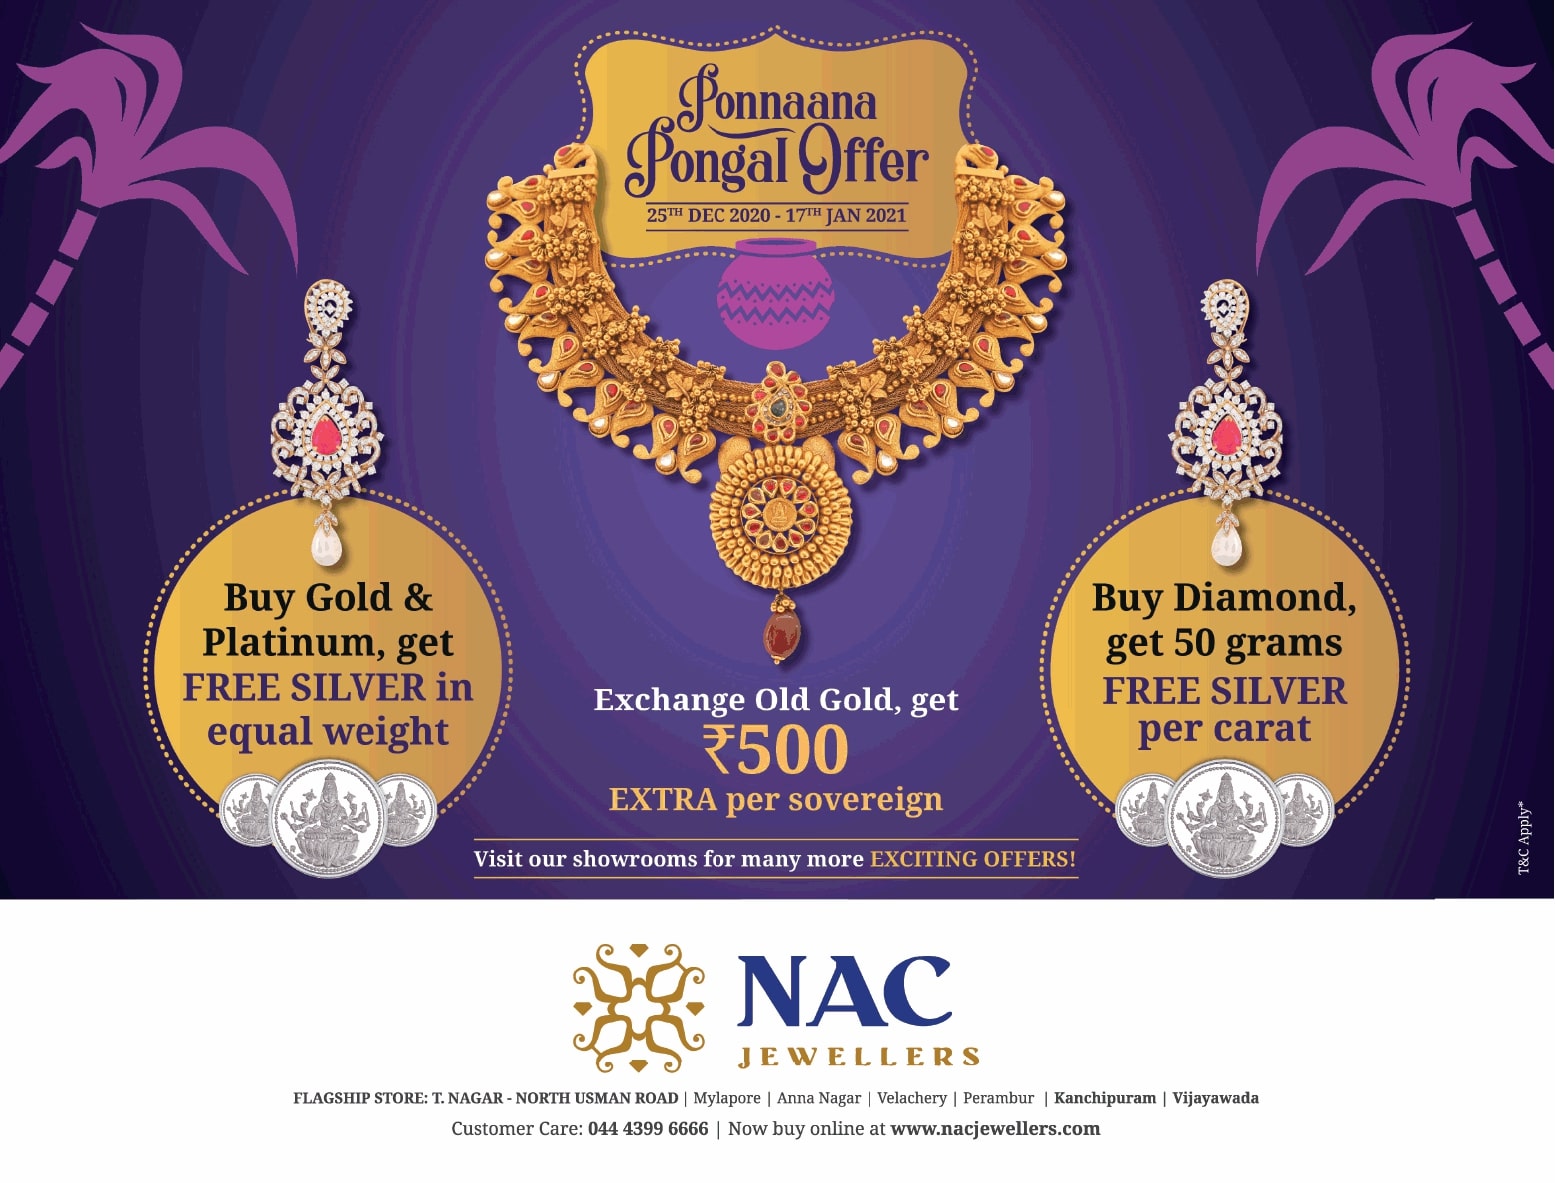 nac-jewellers-ponnaana-pongal-offer-exchange-old-gold-get-rupees-500-extra-per-sovereign-ad-chennai-times-08-01-2021